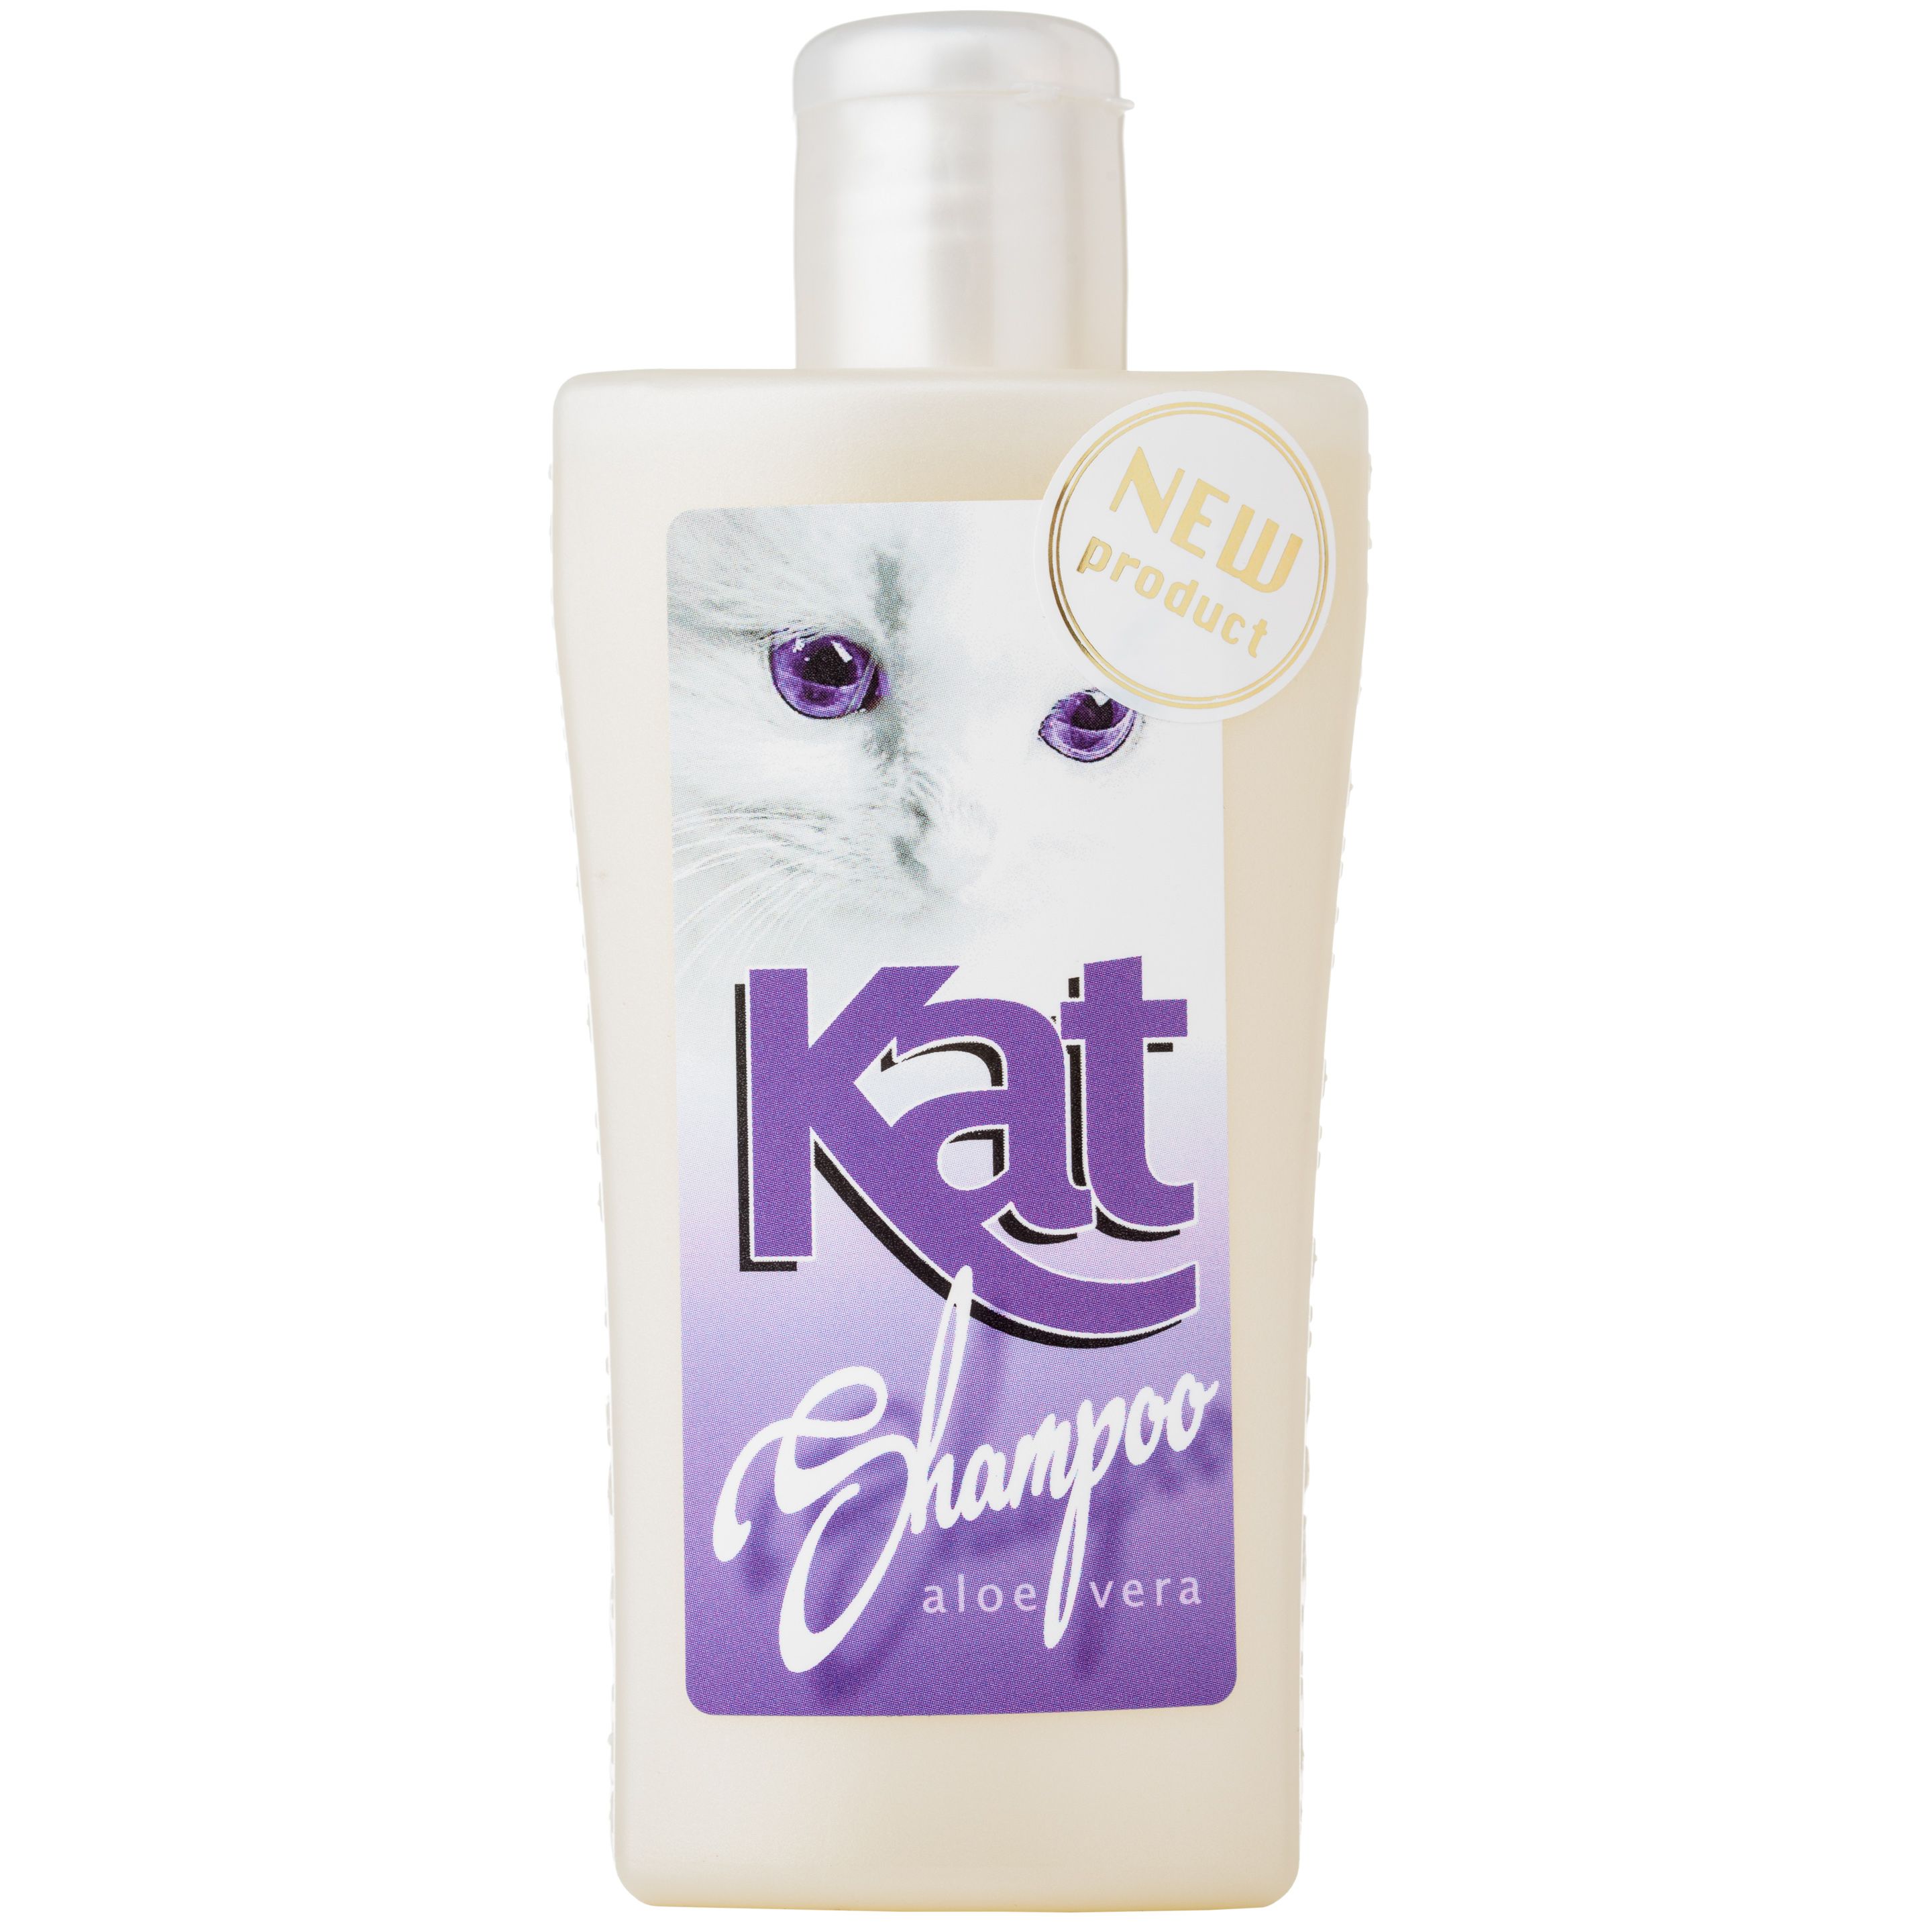 K9 Kat Shampoo 100ml - Soothing Aloe Vera for Sensitive Cat Skin, 1:20 Concentrate